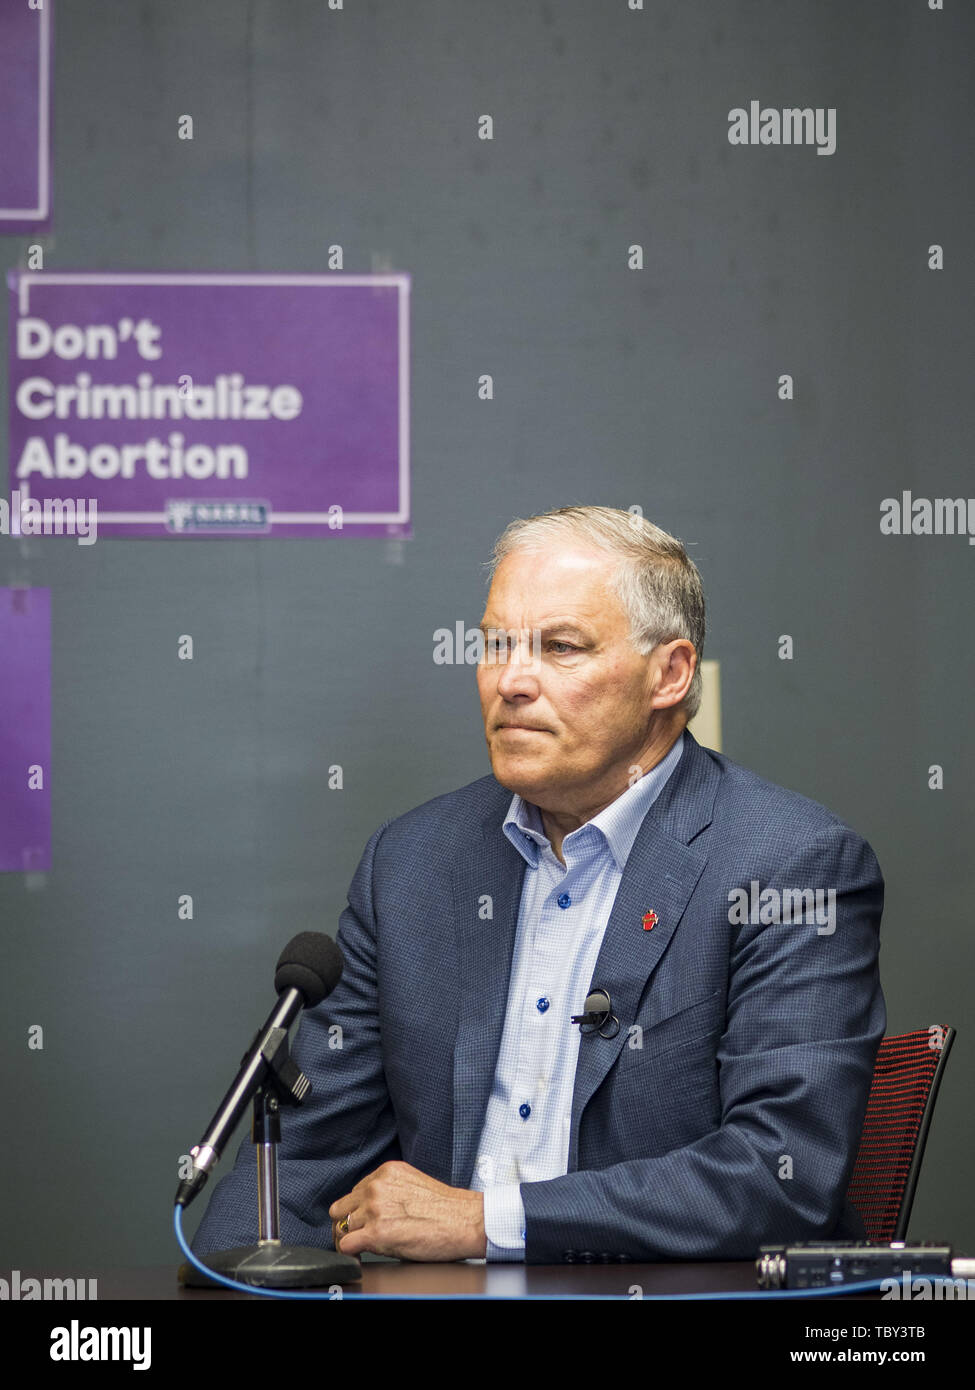 Des Moines, Iowa, USA. 3rd June, 2019. Governor JAY INSLEE (D-WA), at a NARAL event in Des Moines. Governor Inslee is running to be the Democratic candidate for the US Presidency in 2020, He talked to a group of NARAL supporters in Des Moines Monday morning and committed his support to a woman's rights to choose. Iowa traditionally hosts the the first election event of the presidential election cycle. The Iowa Caucuses will be on Feb. 3, 2020. Credit: Jack Kurtz/ZUMA Wire/Alamy Live News Stock Photo